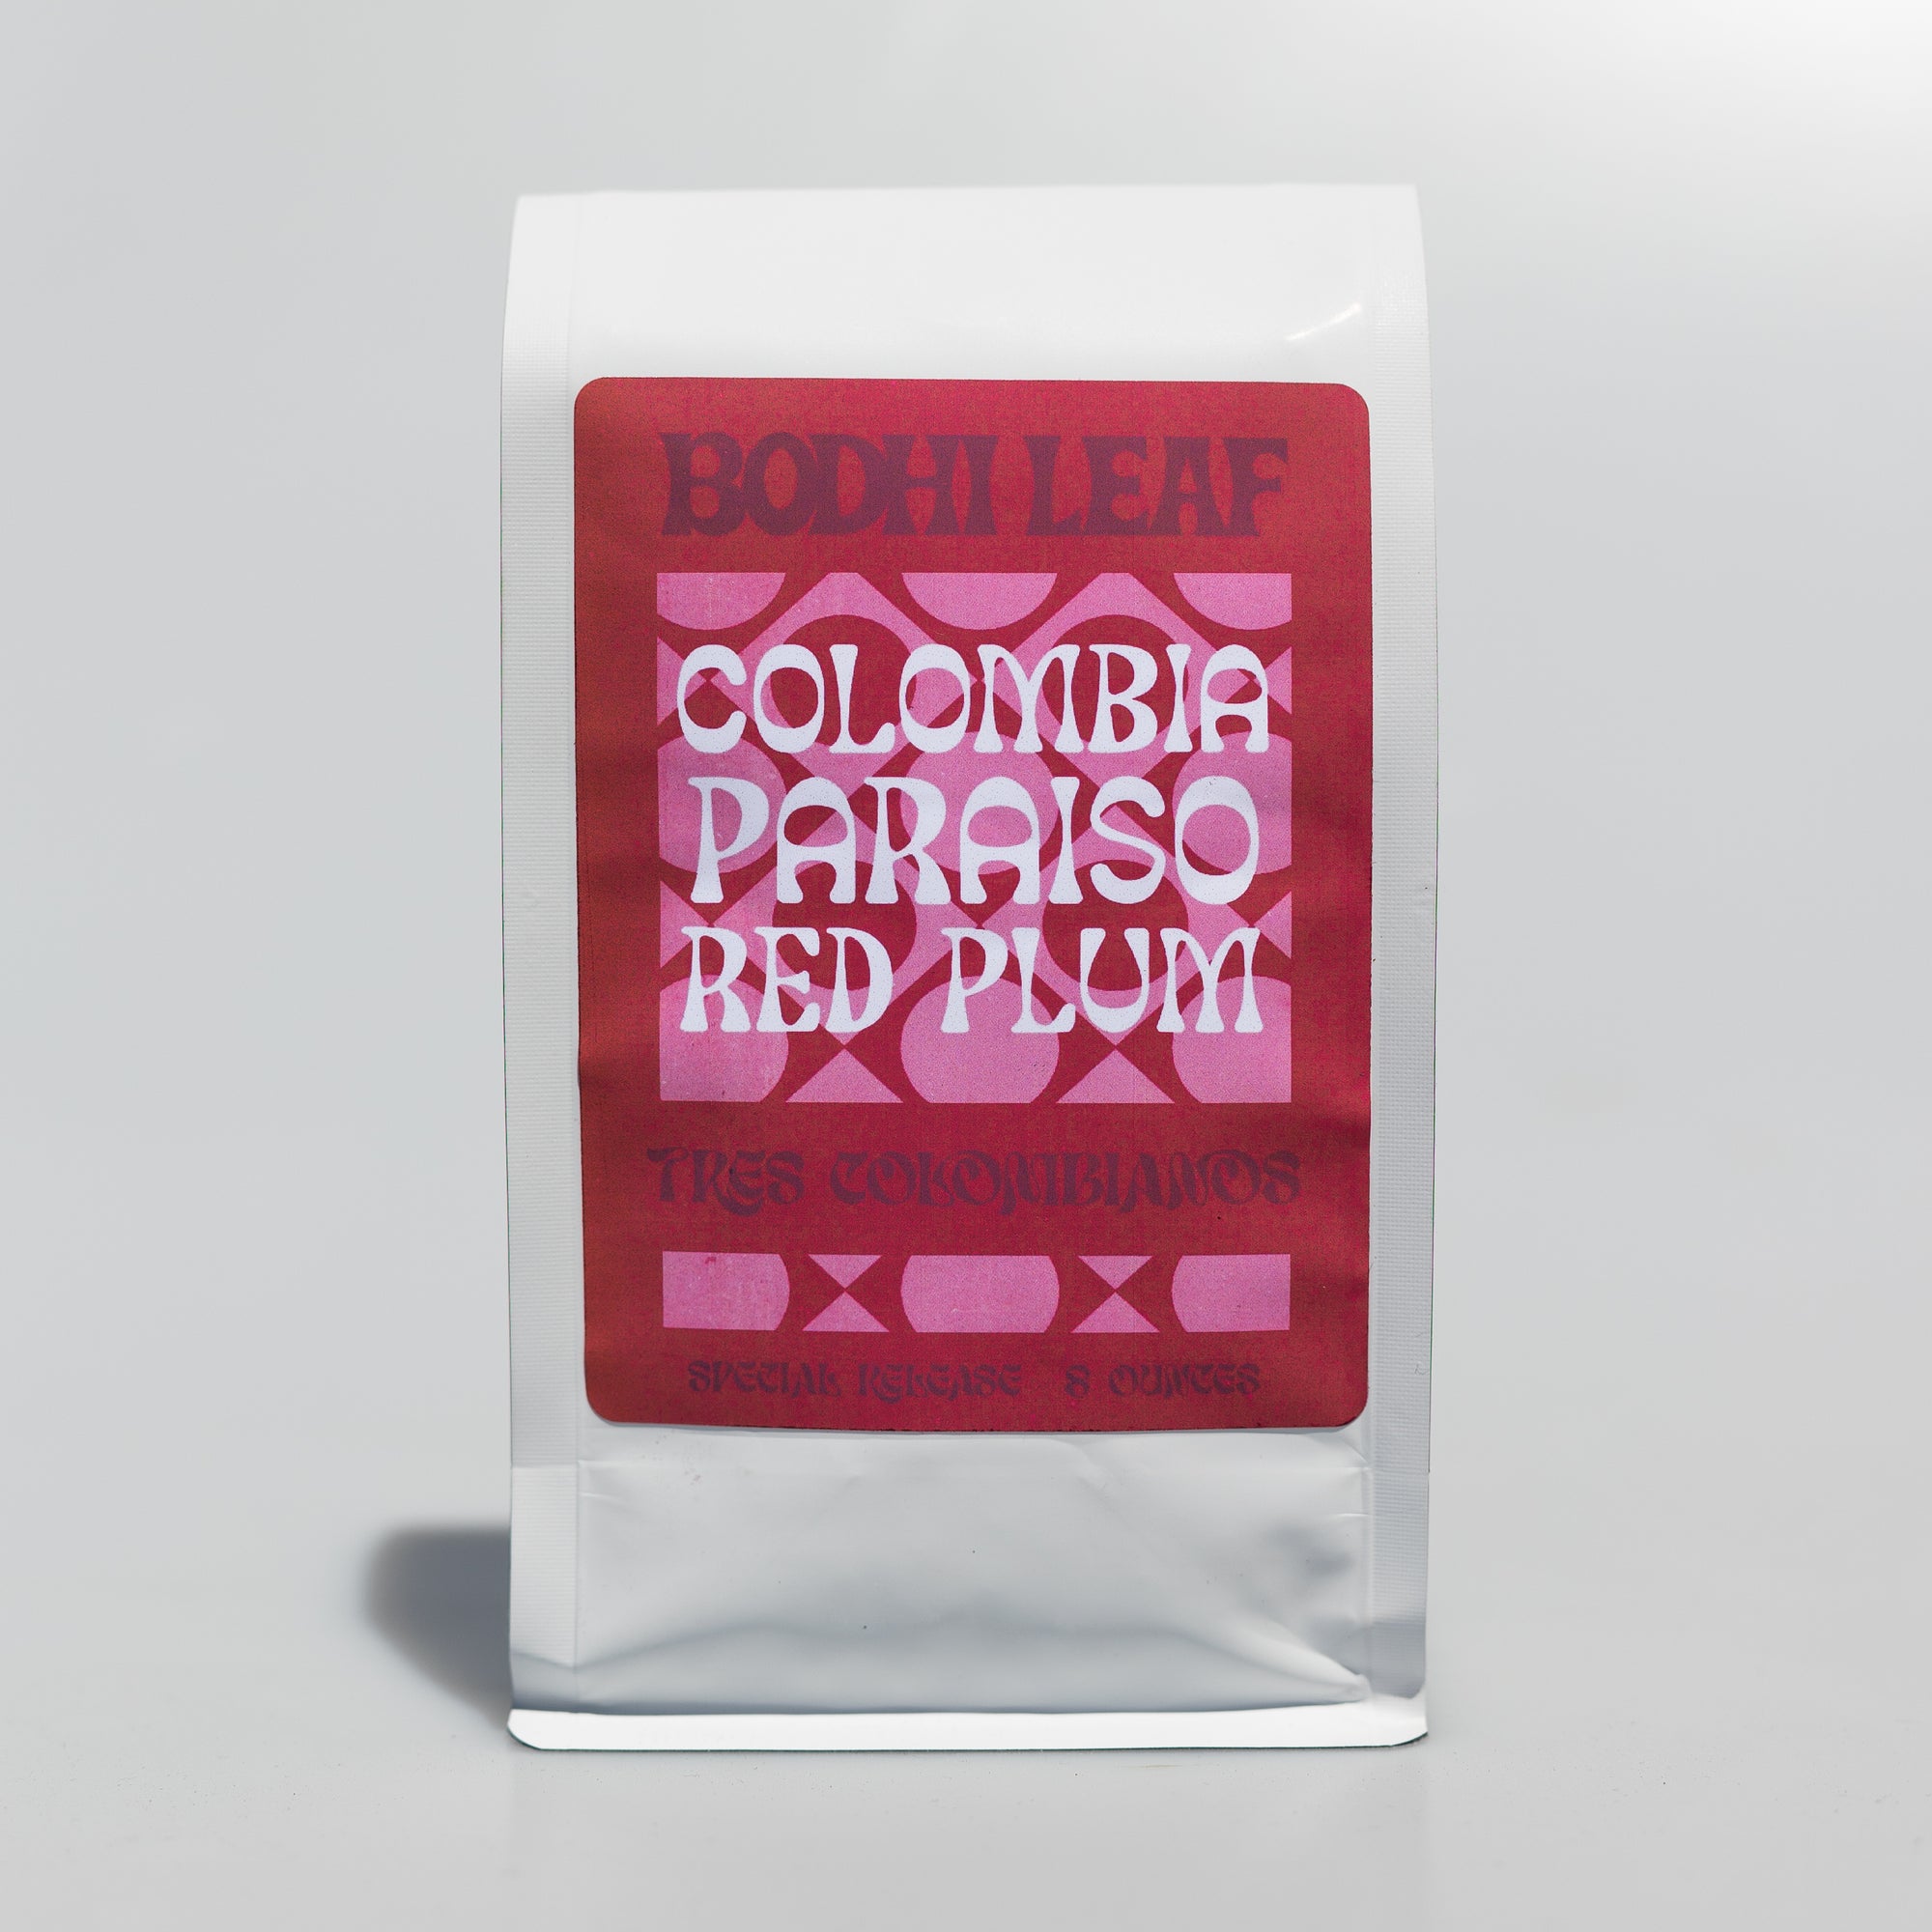 bag of Colombia Paraiso Red Plum